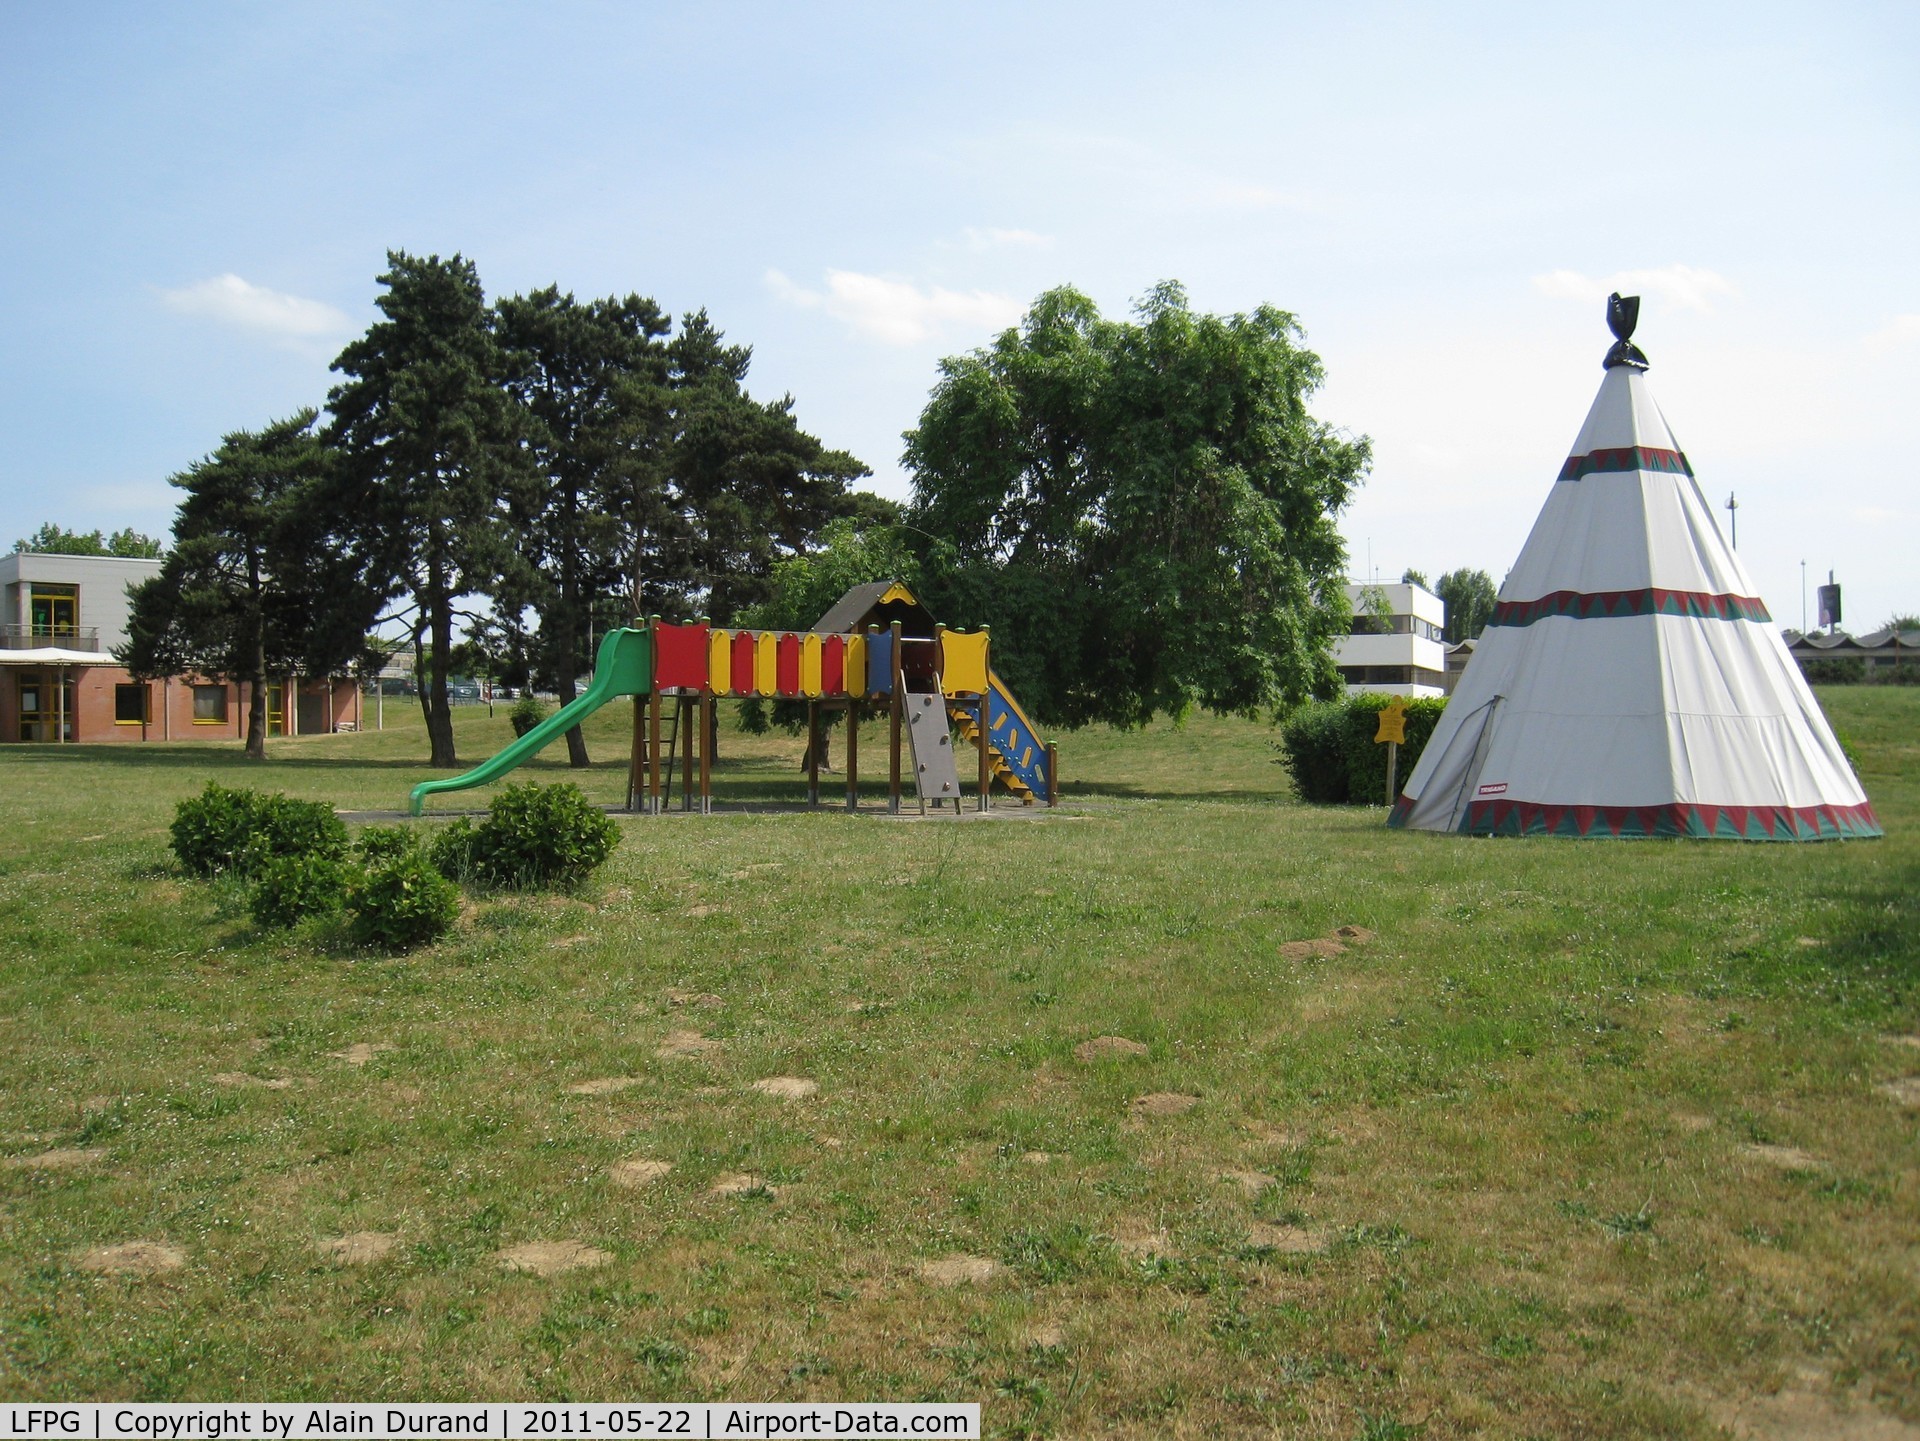 Paris Charles de Gaulle Airport (Roissy Airport), Paris France (LFPG) - The airport's teepee, one of the top assets of the kids' playground